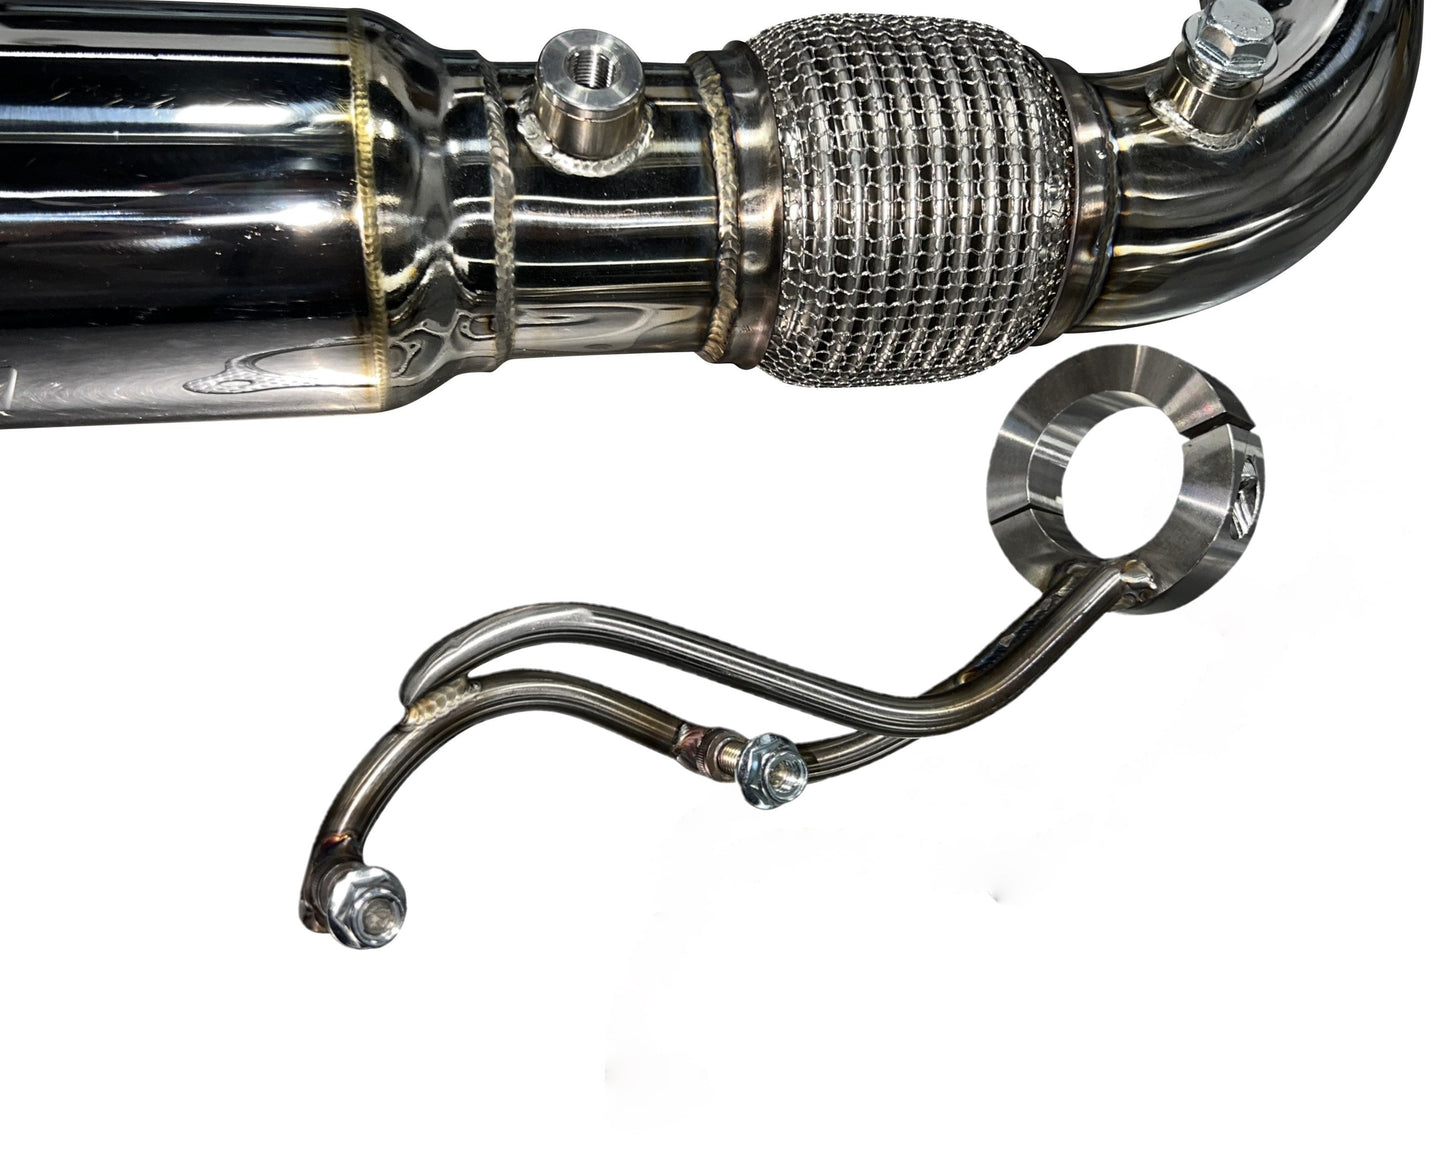 Turbo RZR Desert Series 3" Full Stainless Exhaust System. Fits XPT, Pro XP , Turbo R & S